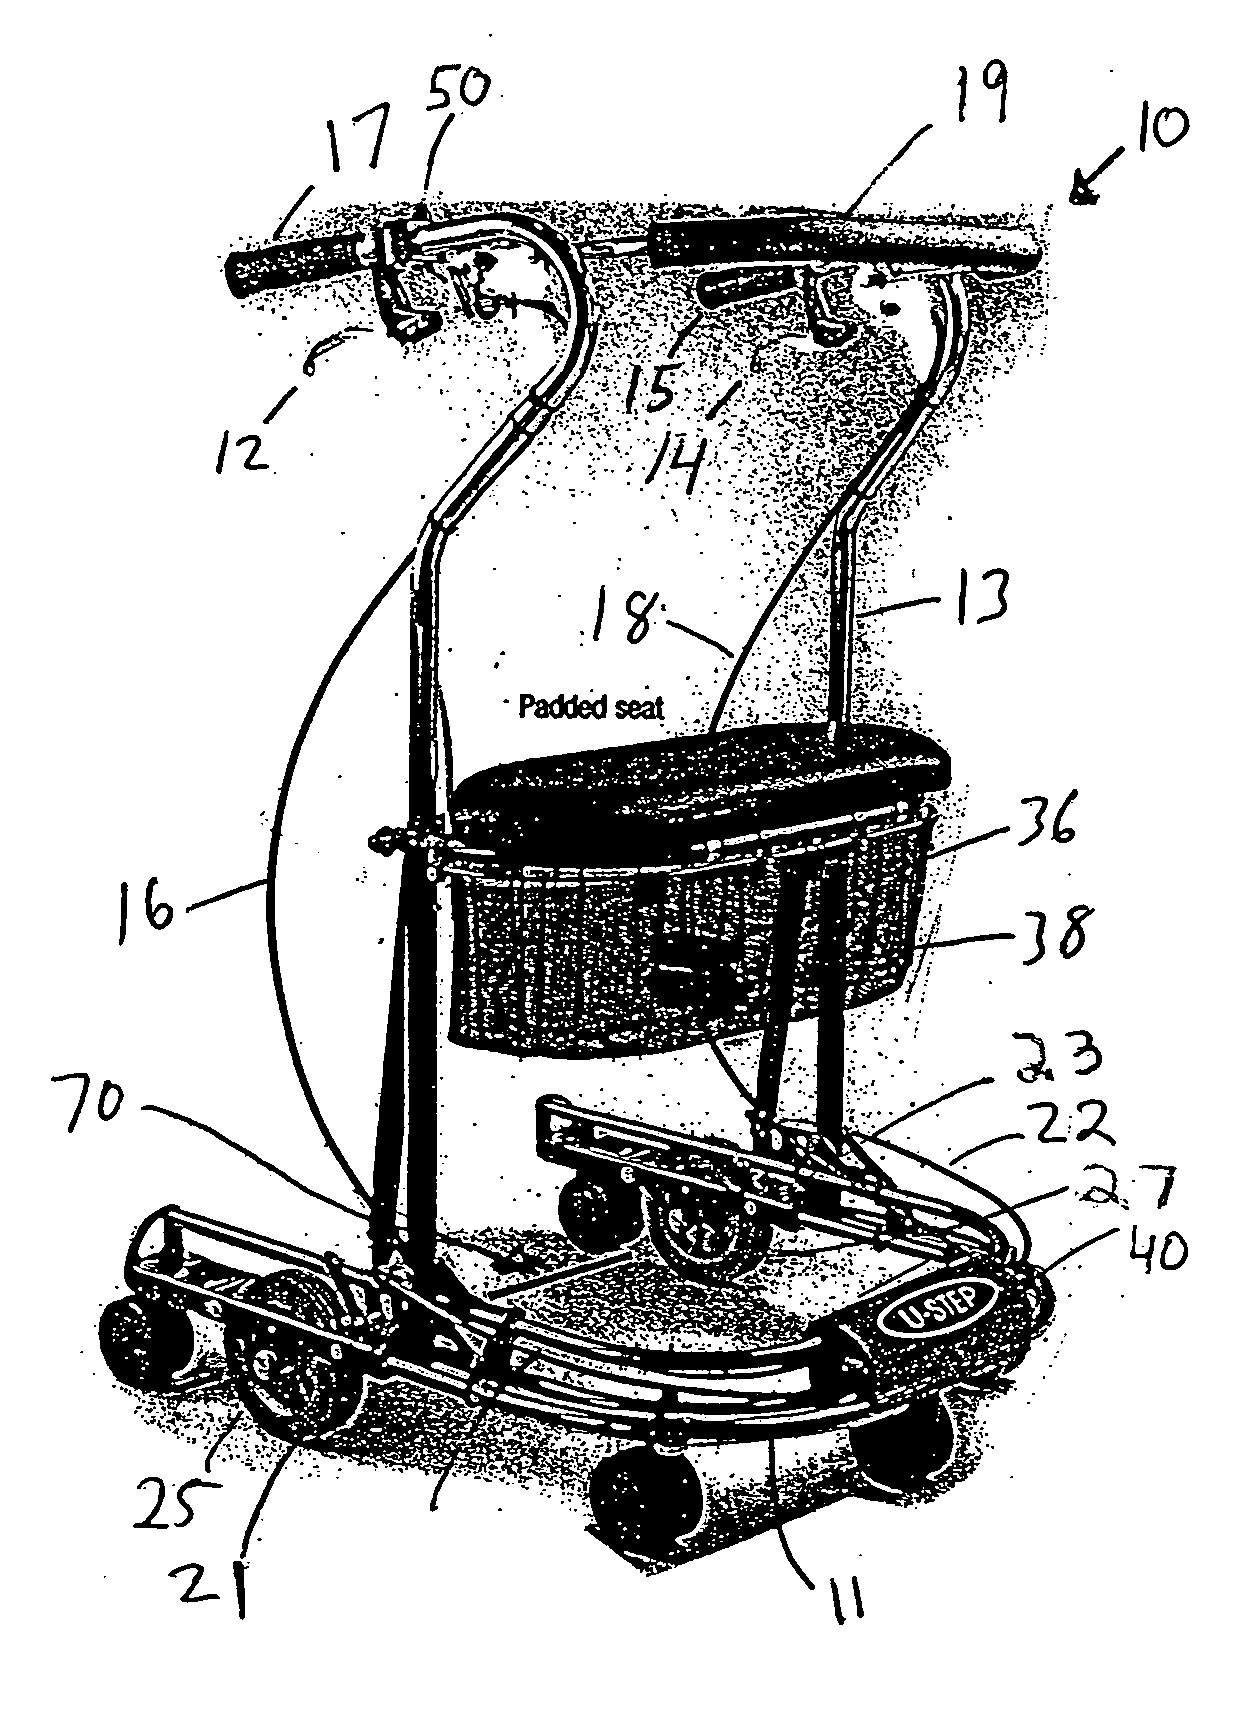 Projection and actuation device for a walking stabilizer